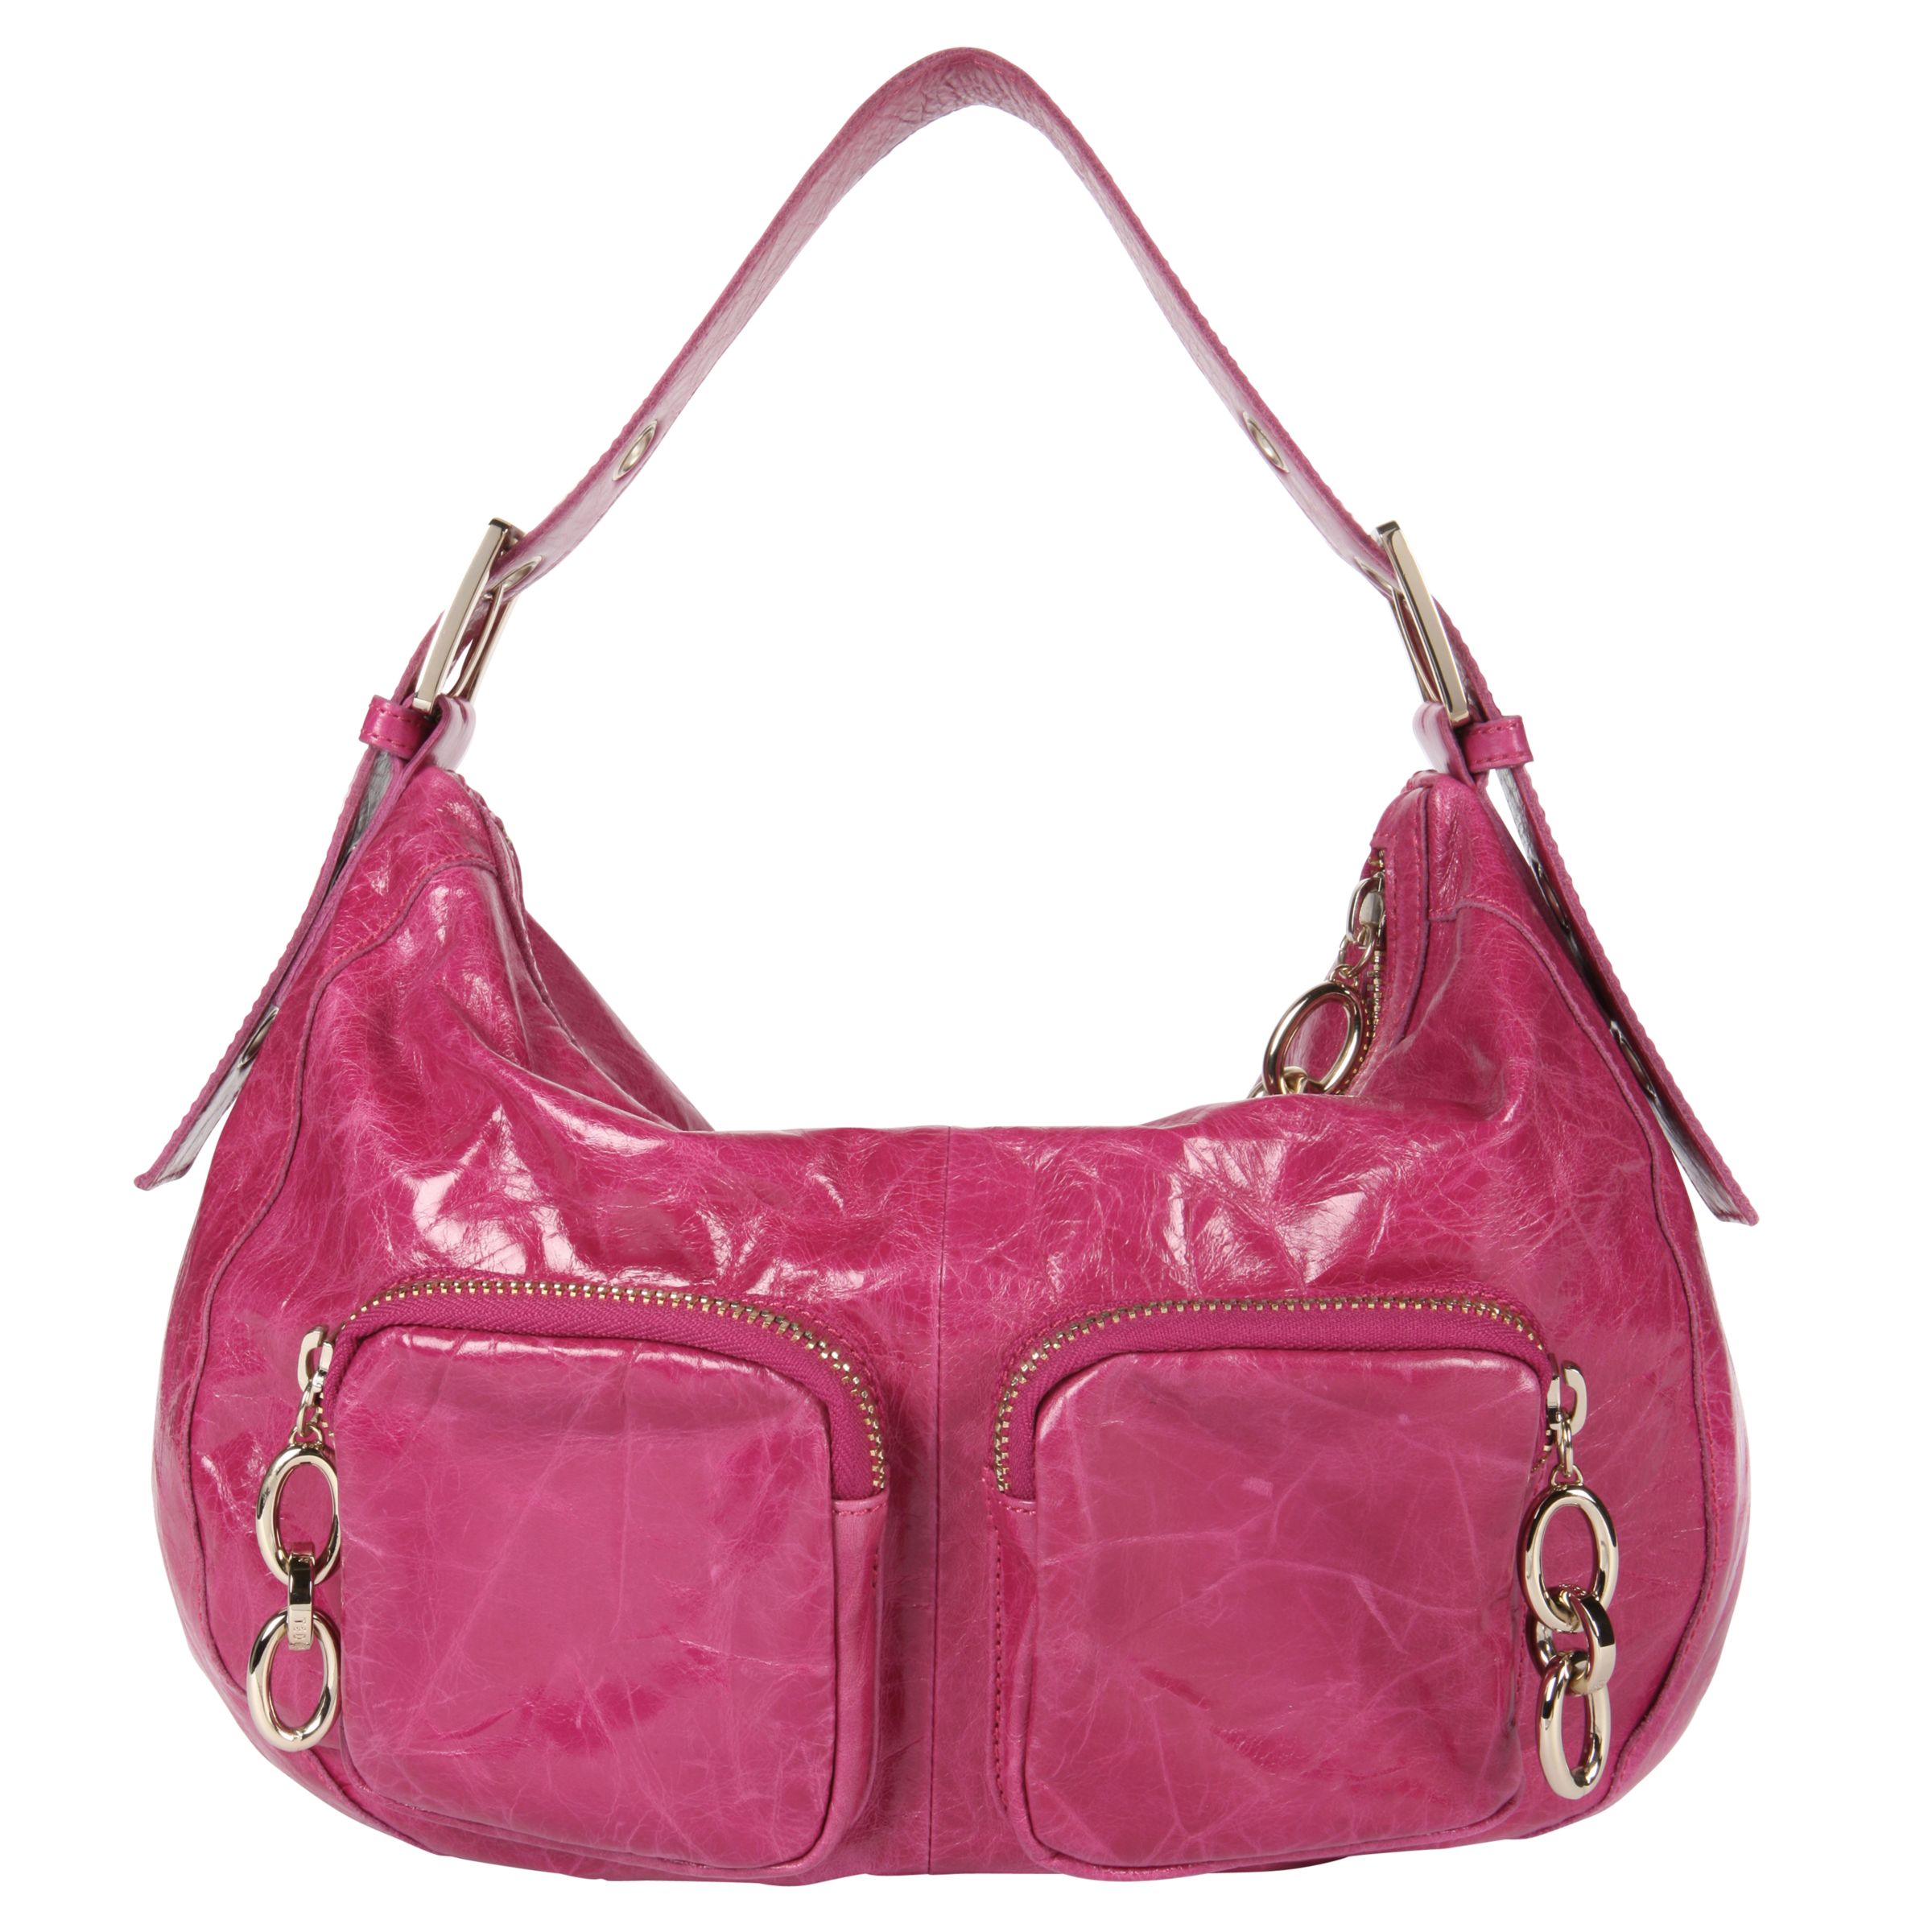 Ted Baker Fitch Chunky Chain Hobo Handbag, Pink at John Lewis